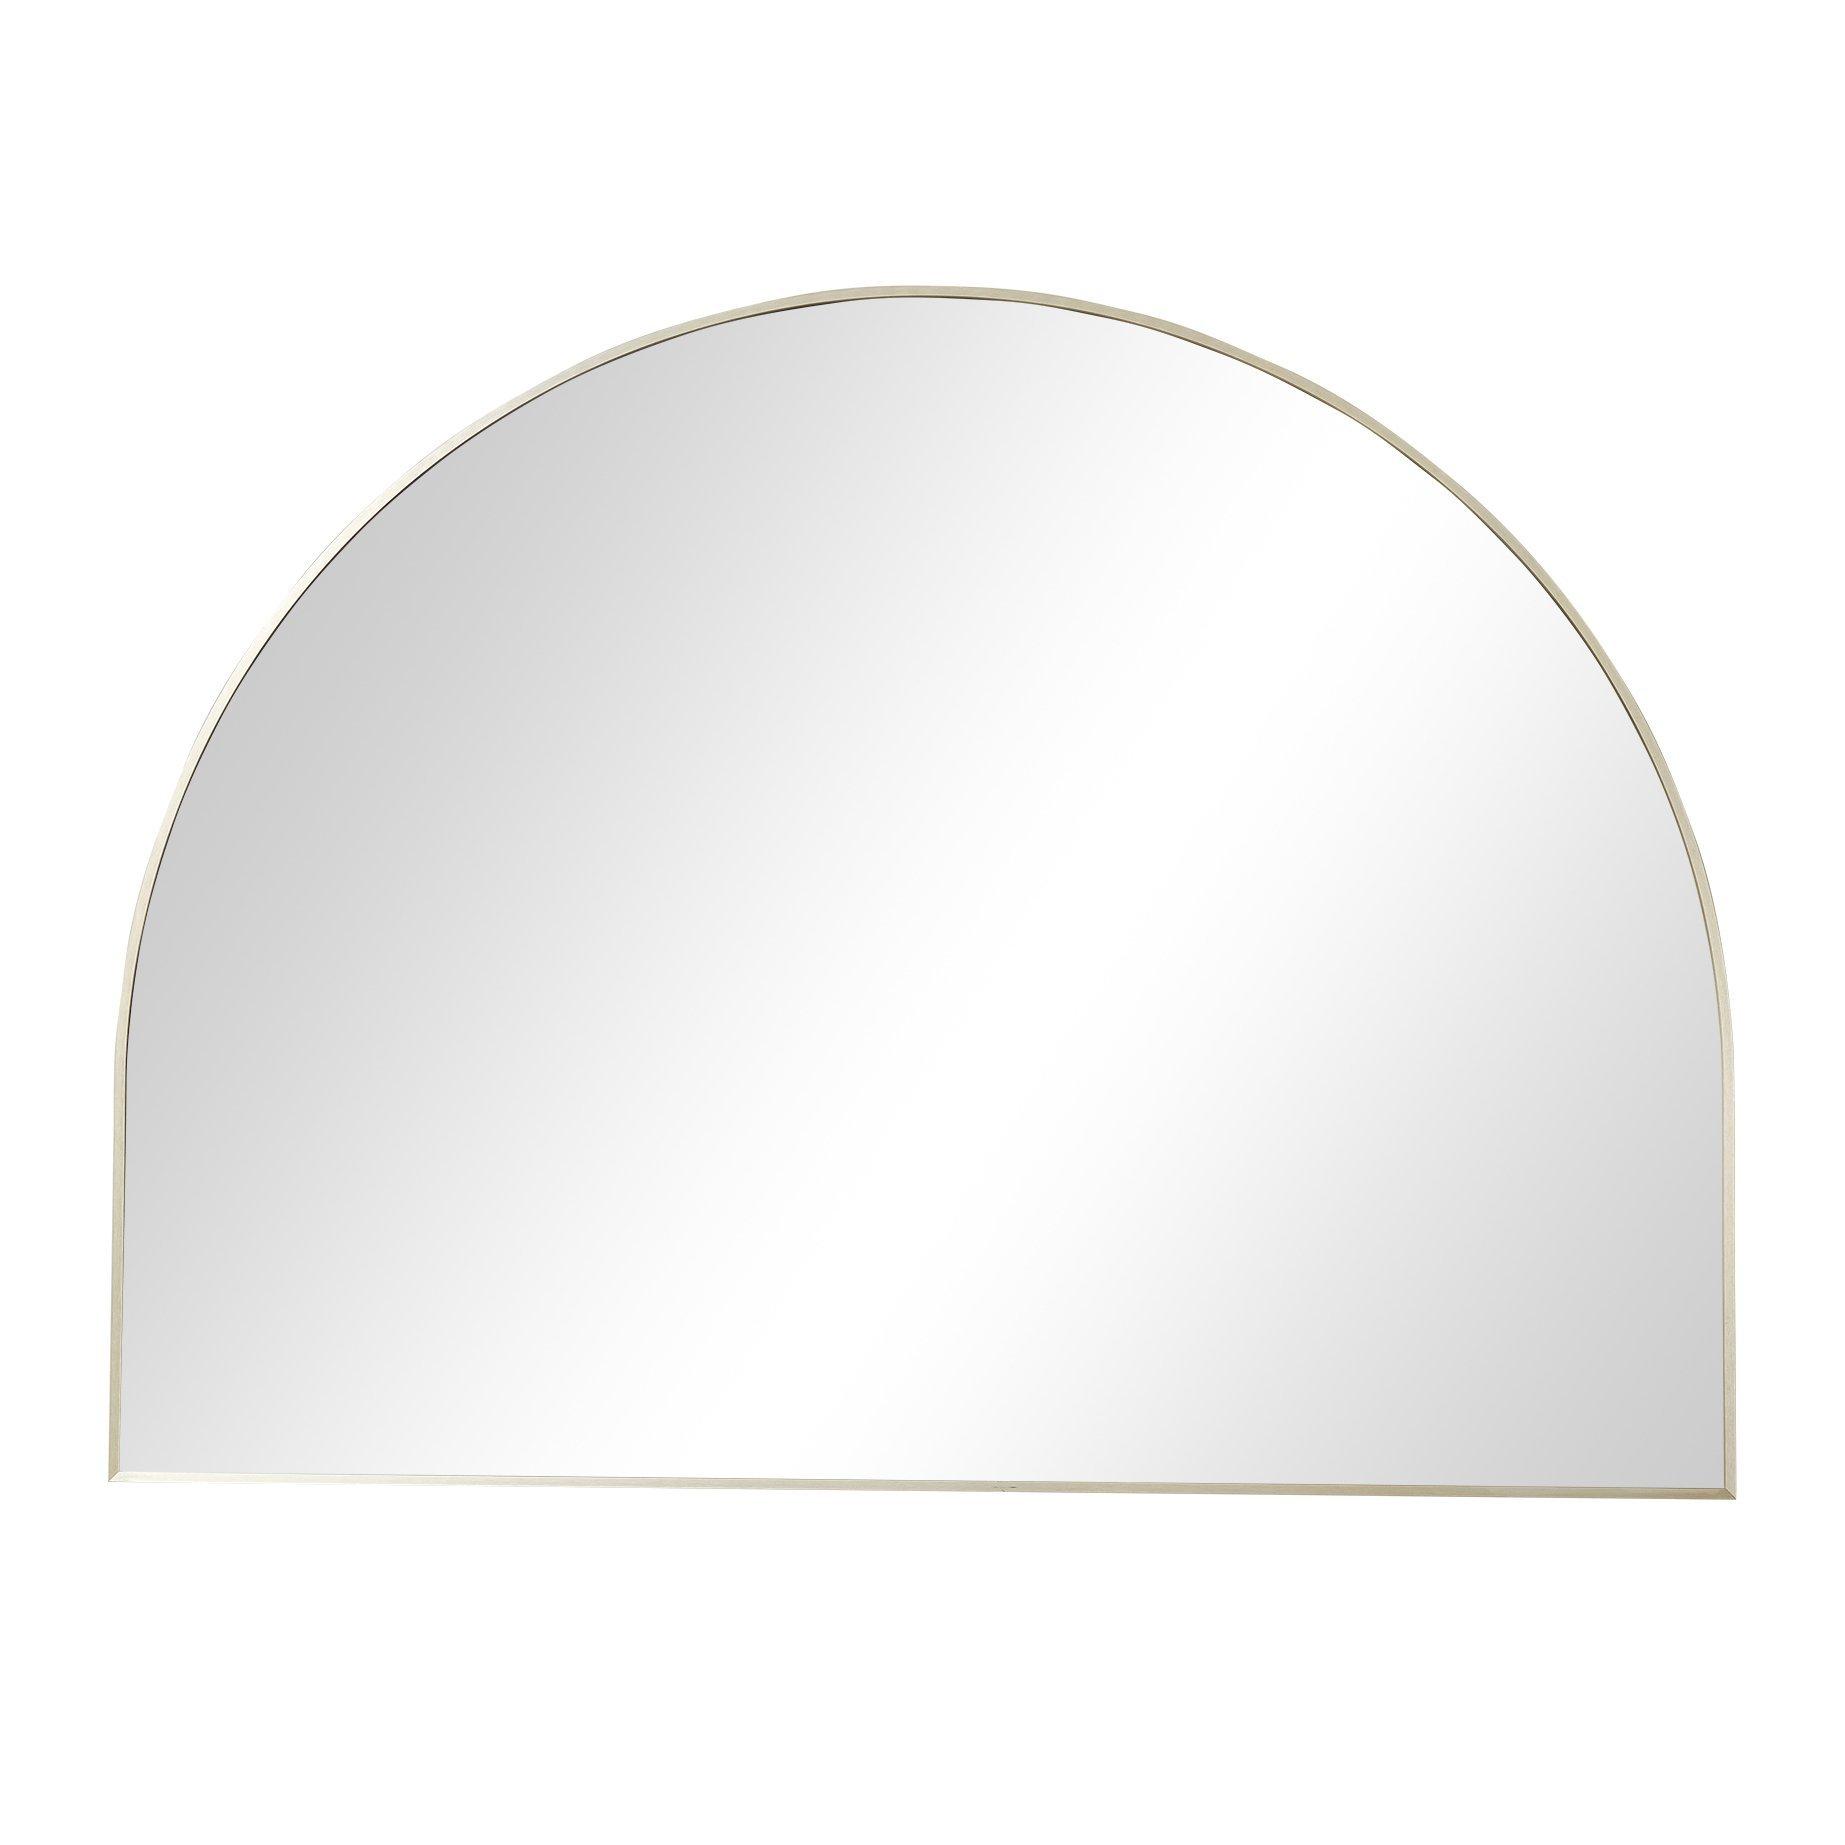 Large Gold Arched Wall Mirror 90cm X 120cm